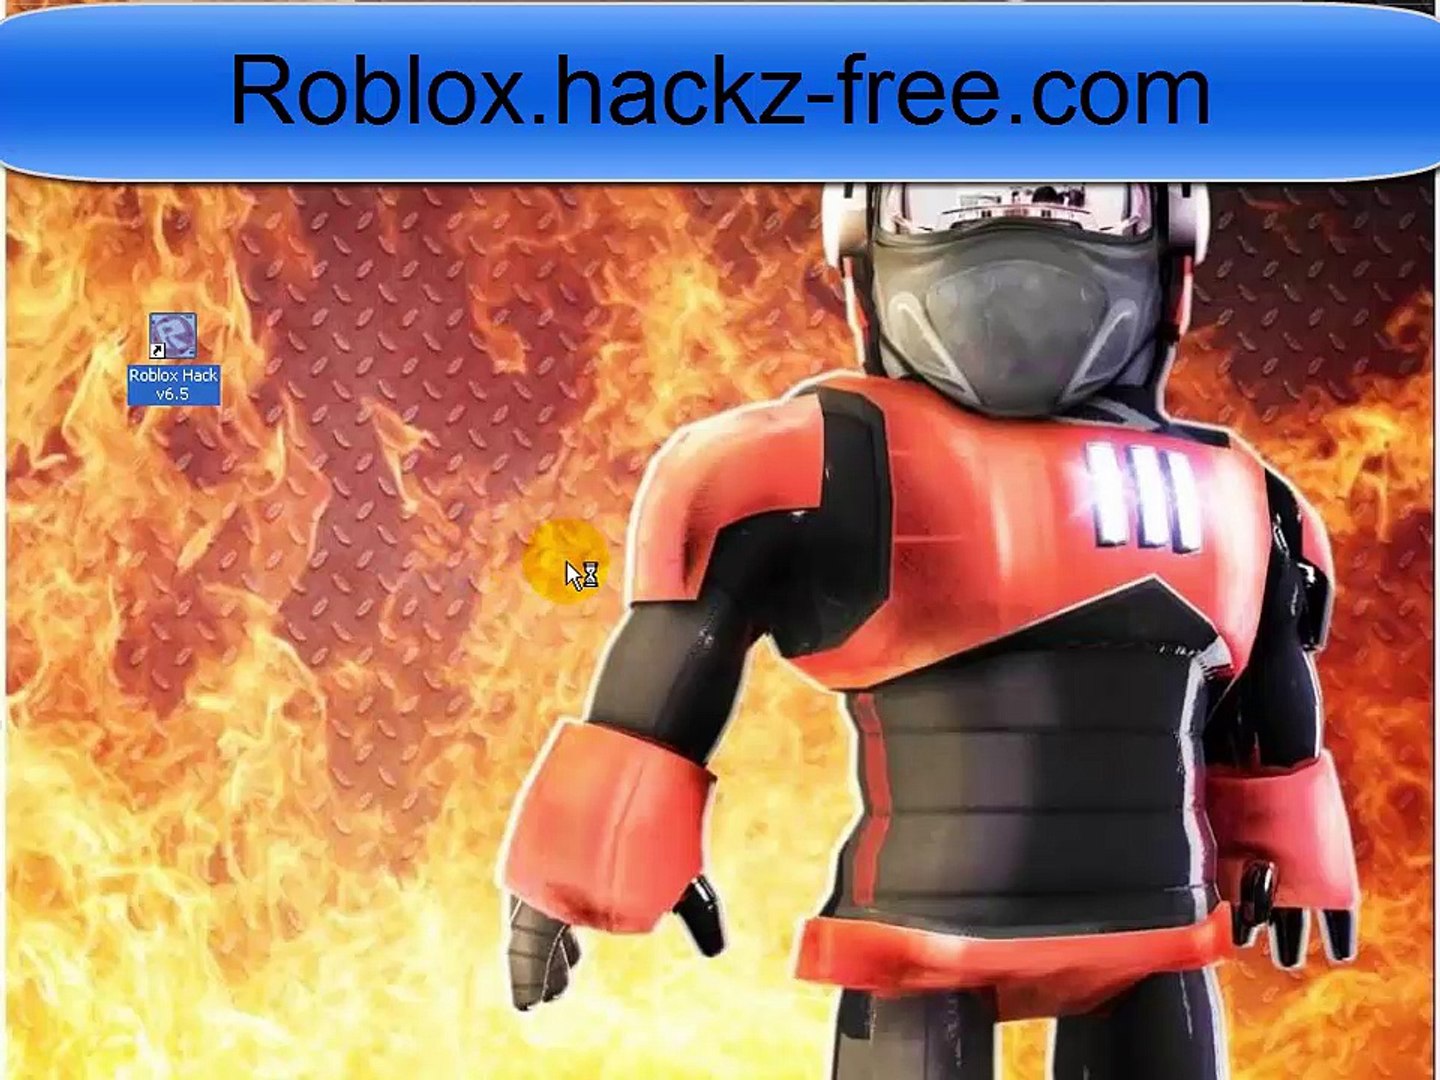 Roblox Hack V4 71 Download Generate Free Robux Video Dailymotion - roblox robux generator v471 download generate free robux